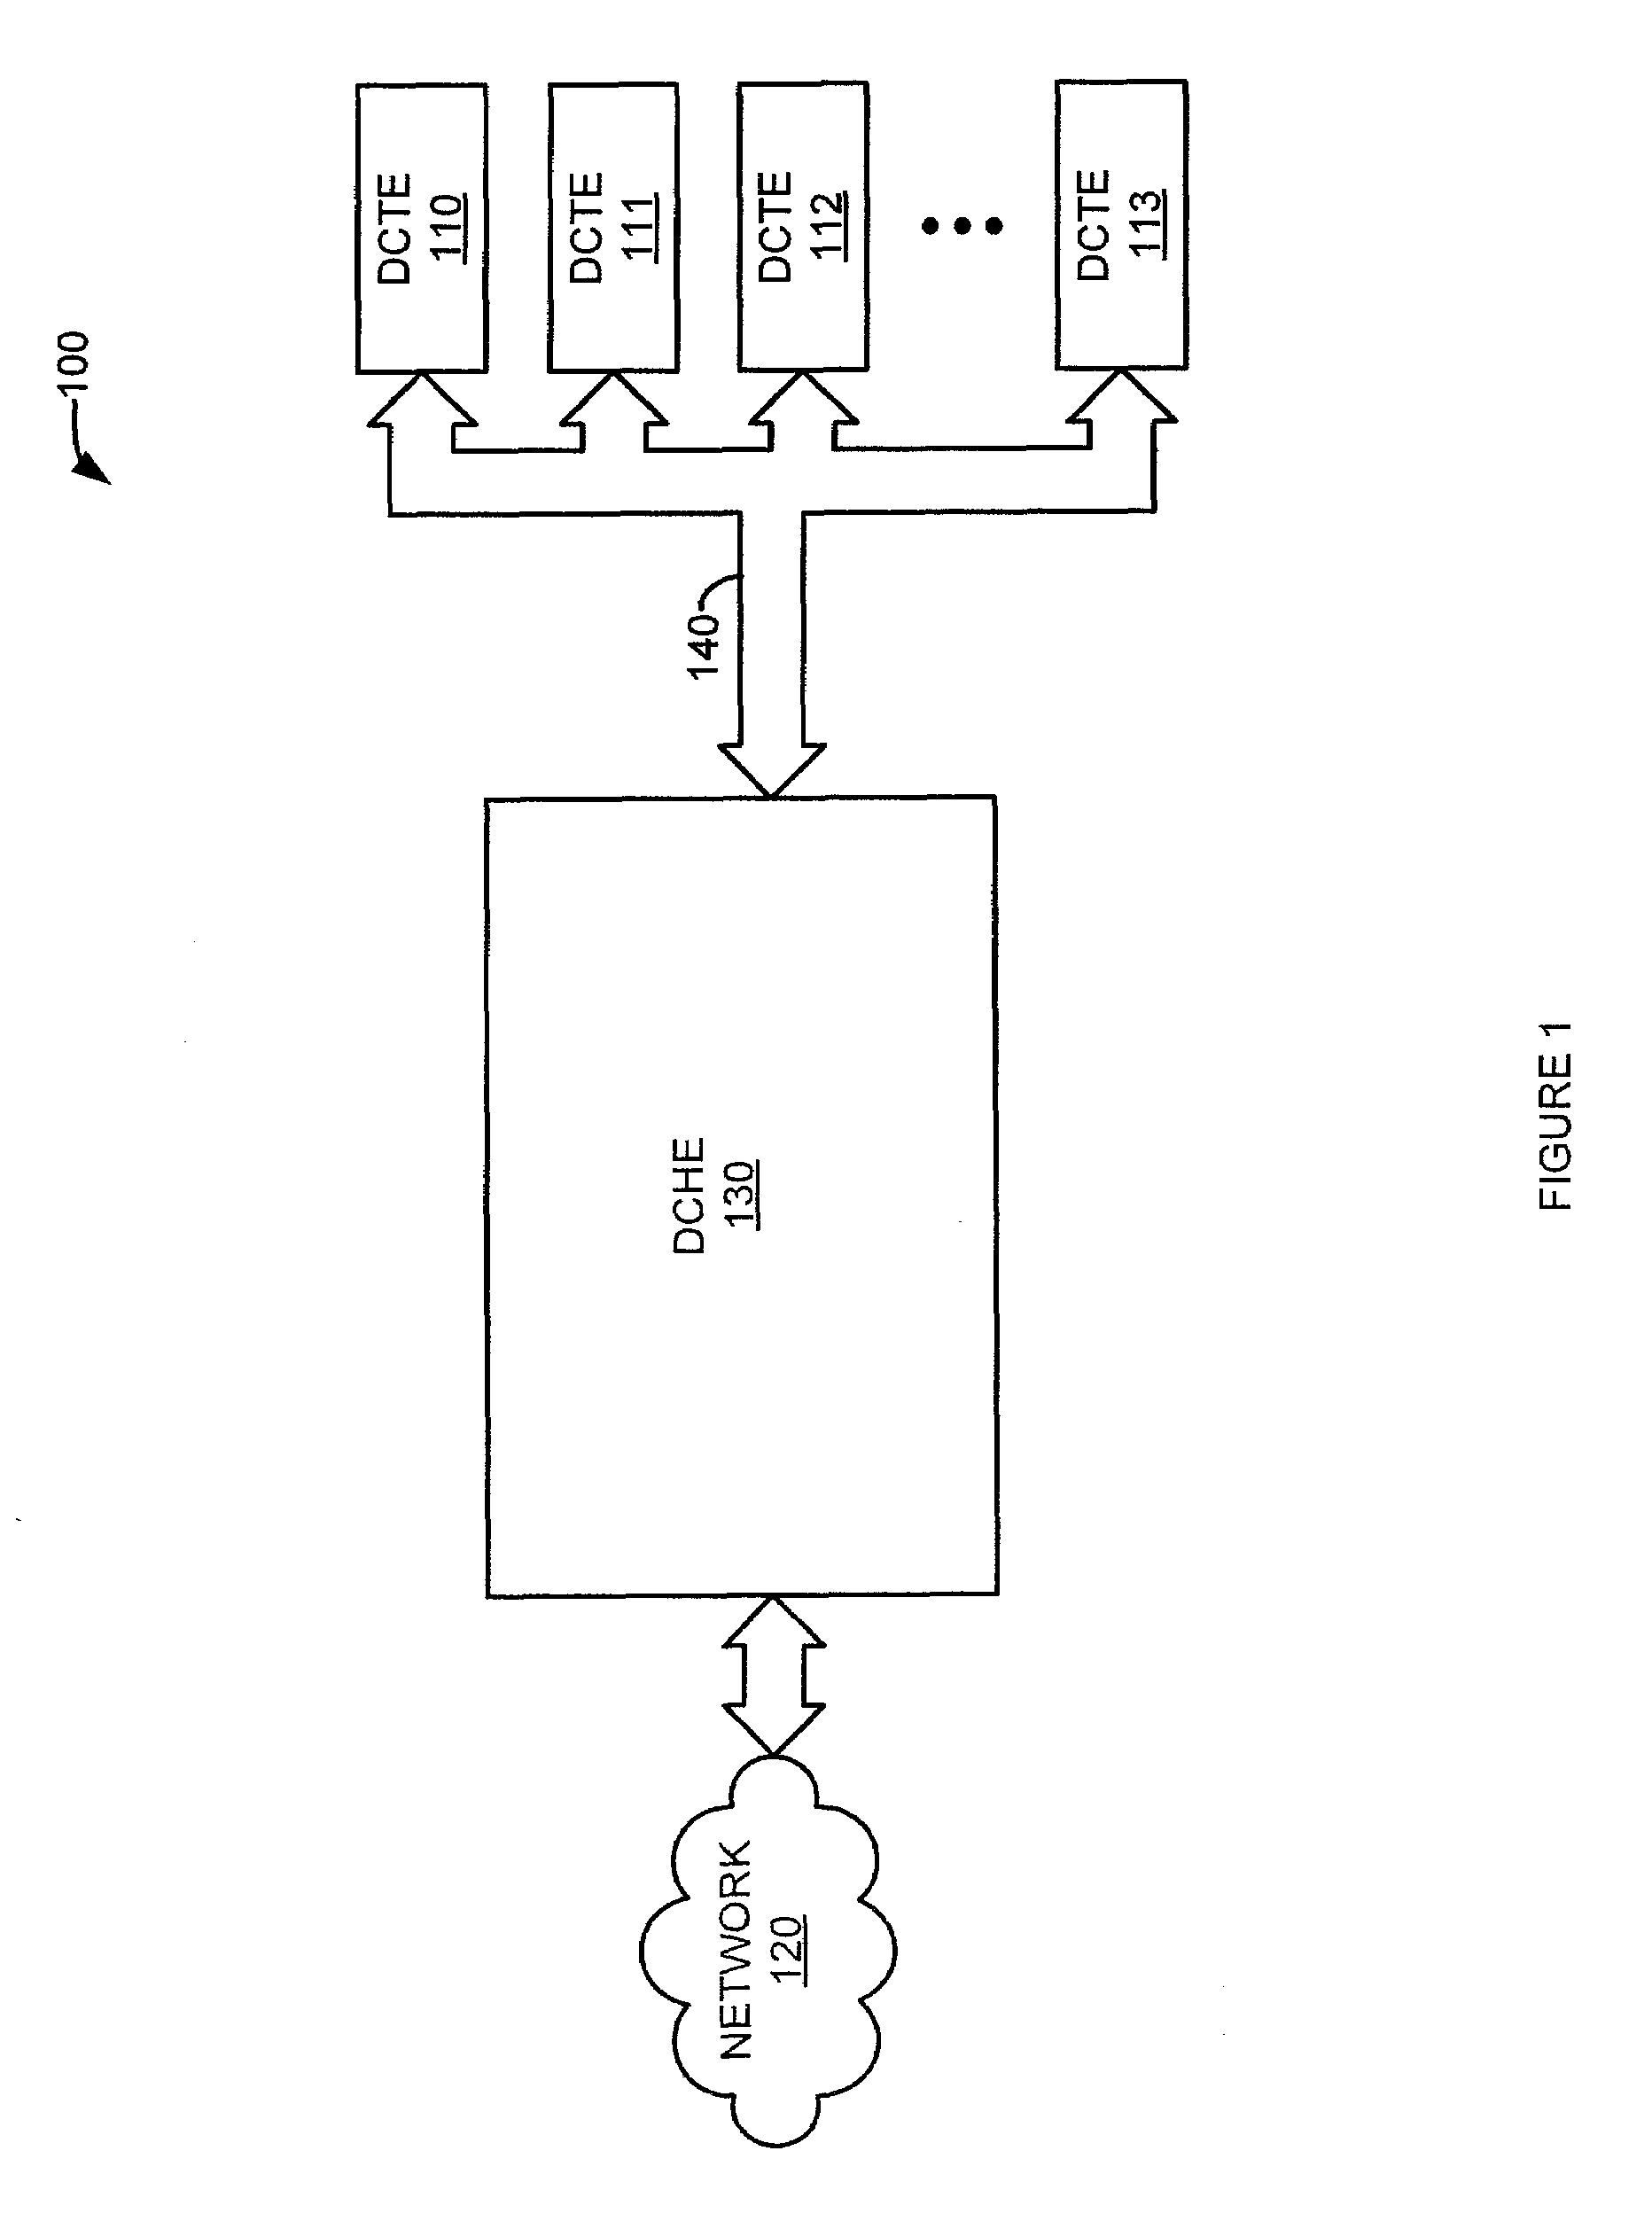 Reducing receiver power dissipation